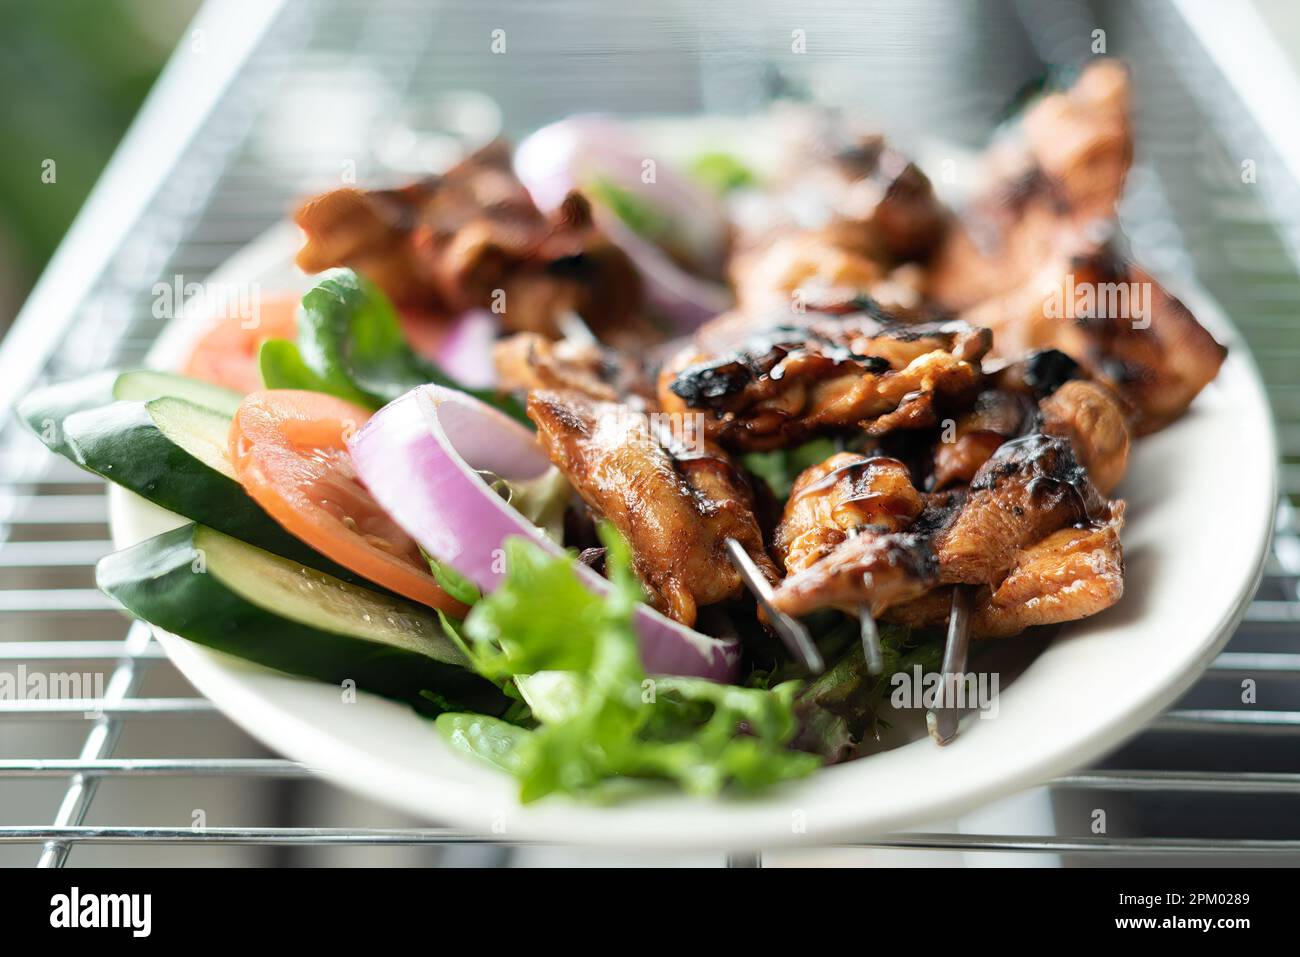 A close-up shot of an appetizing plate of food, featuring a variety of fresh cooked meats and vegetables, with a colorful garnish of herbs Stock Photo